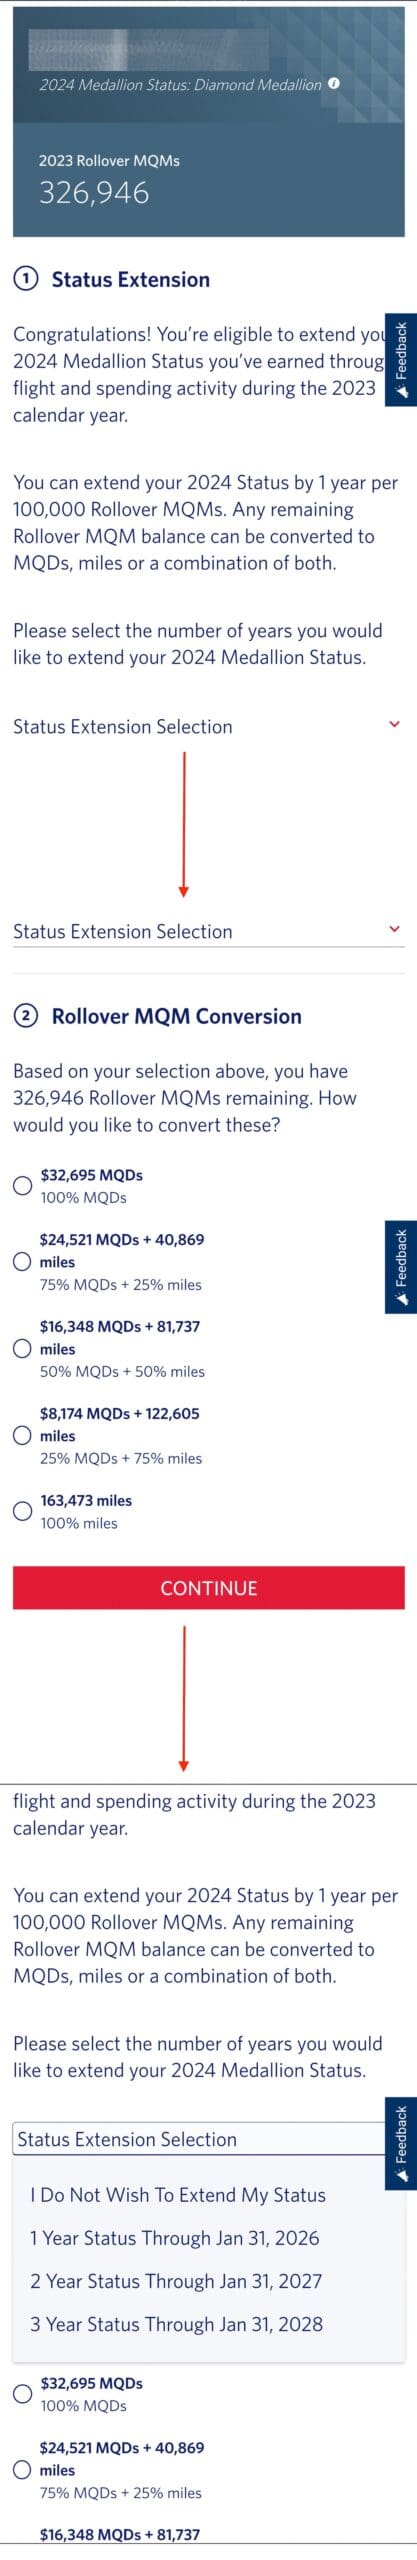 Here's how to convert Delta MQM to MQD or SkyMiles